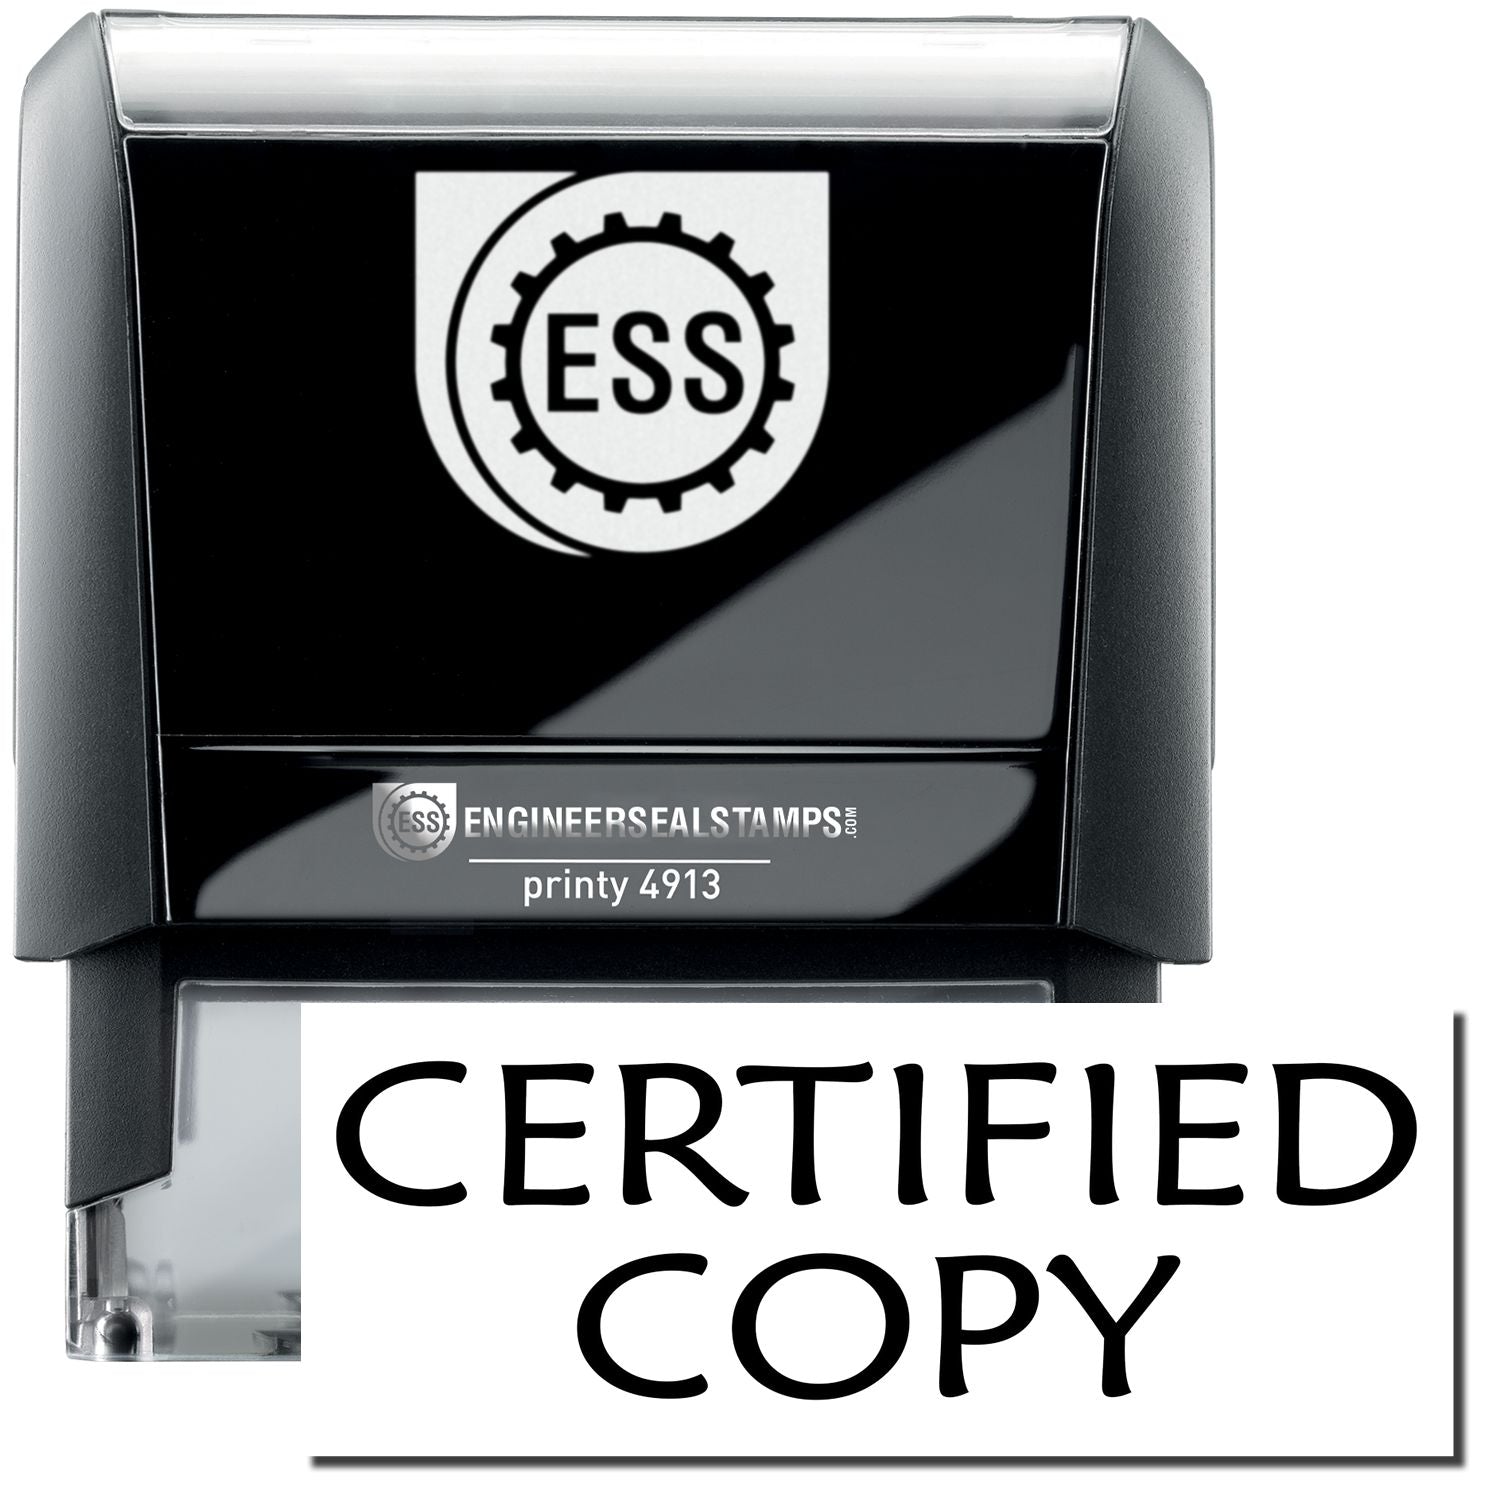 A self-inking stamp with a stamped image showing how the text "CERTIFIED COPY" in a large bold font is displayed by it.